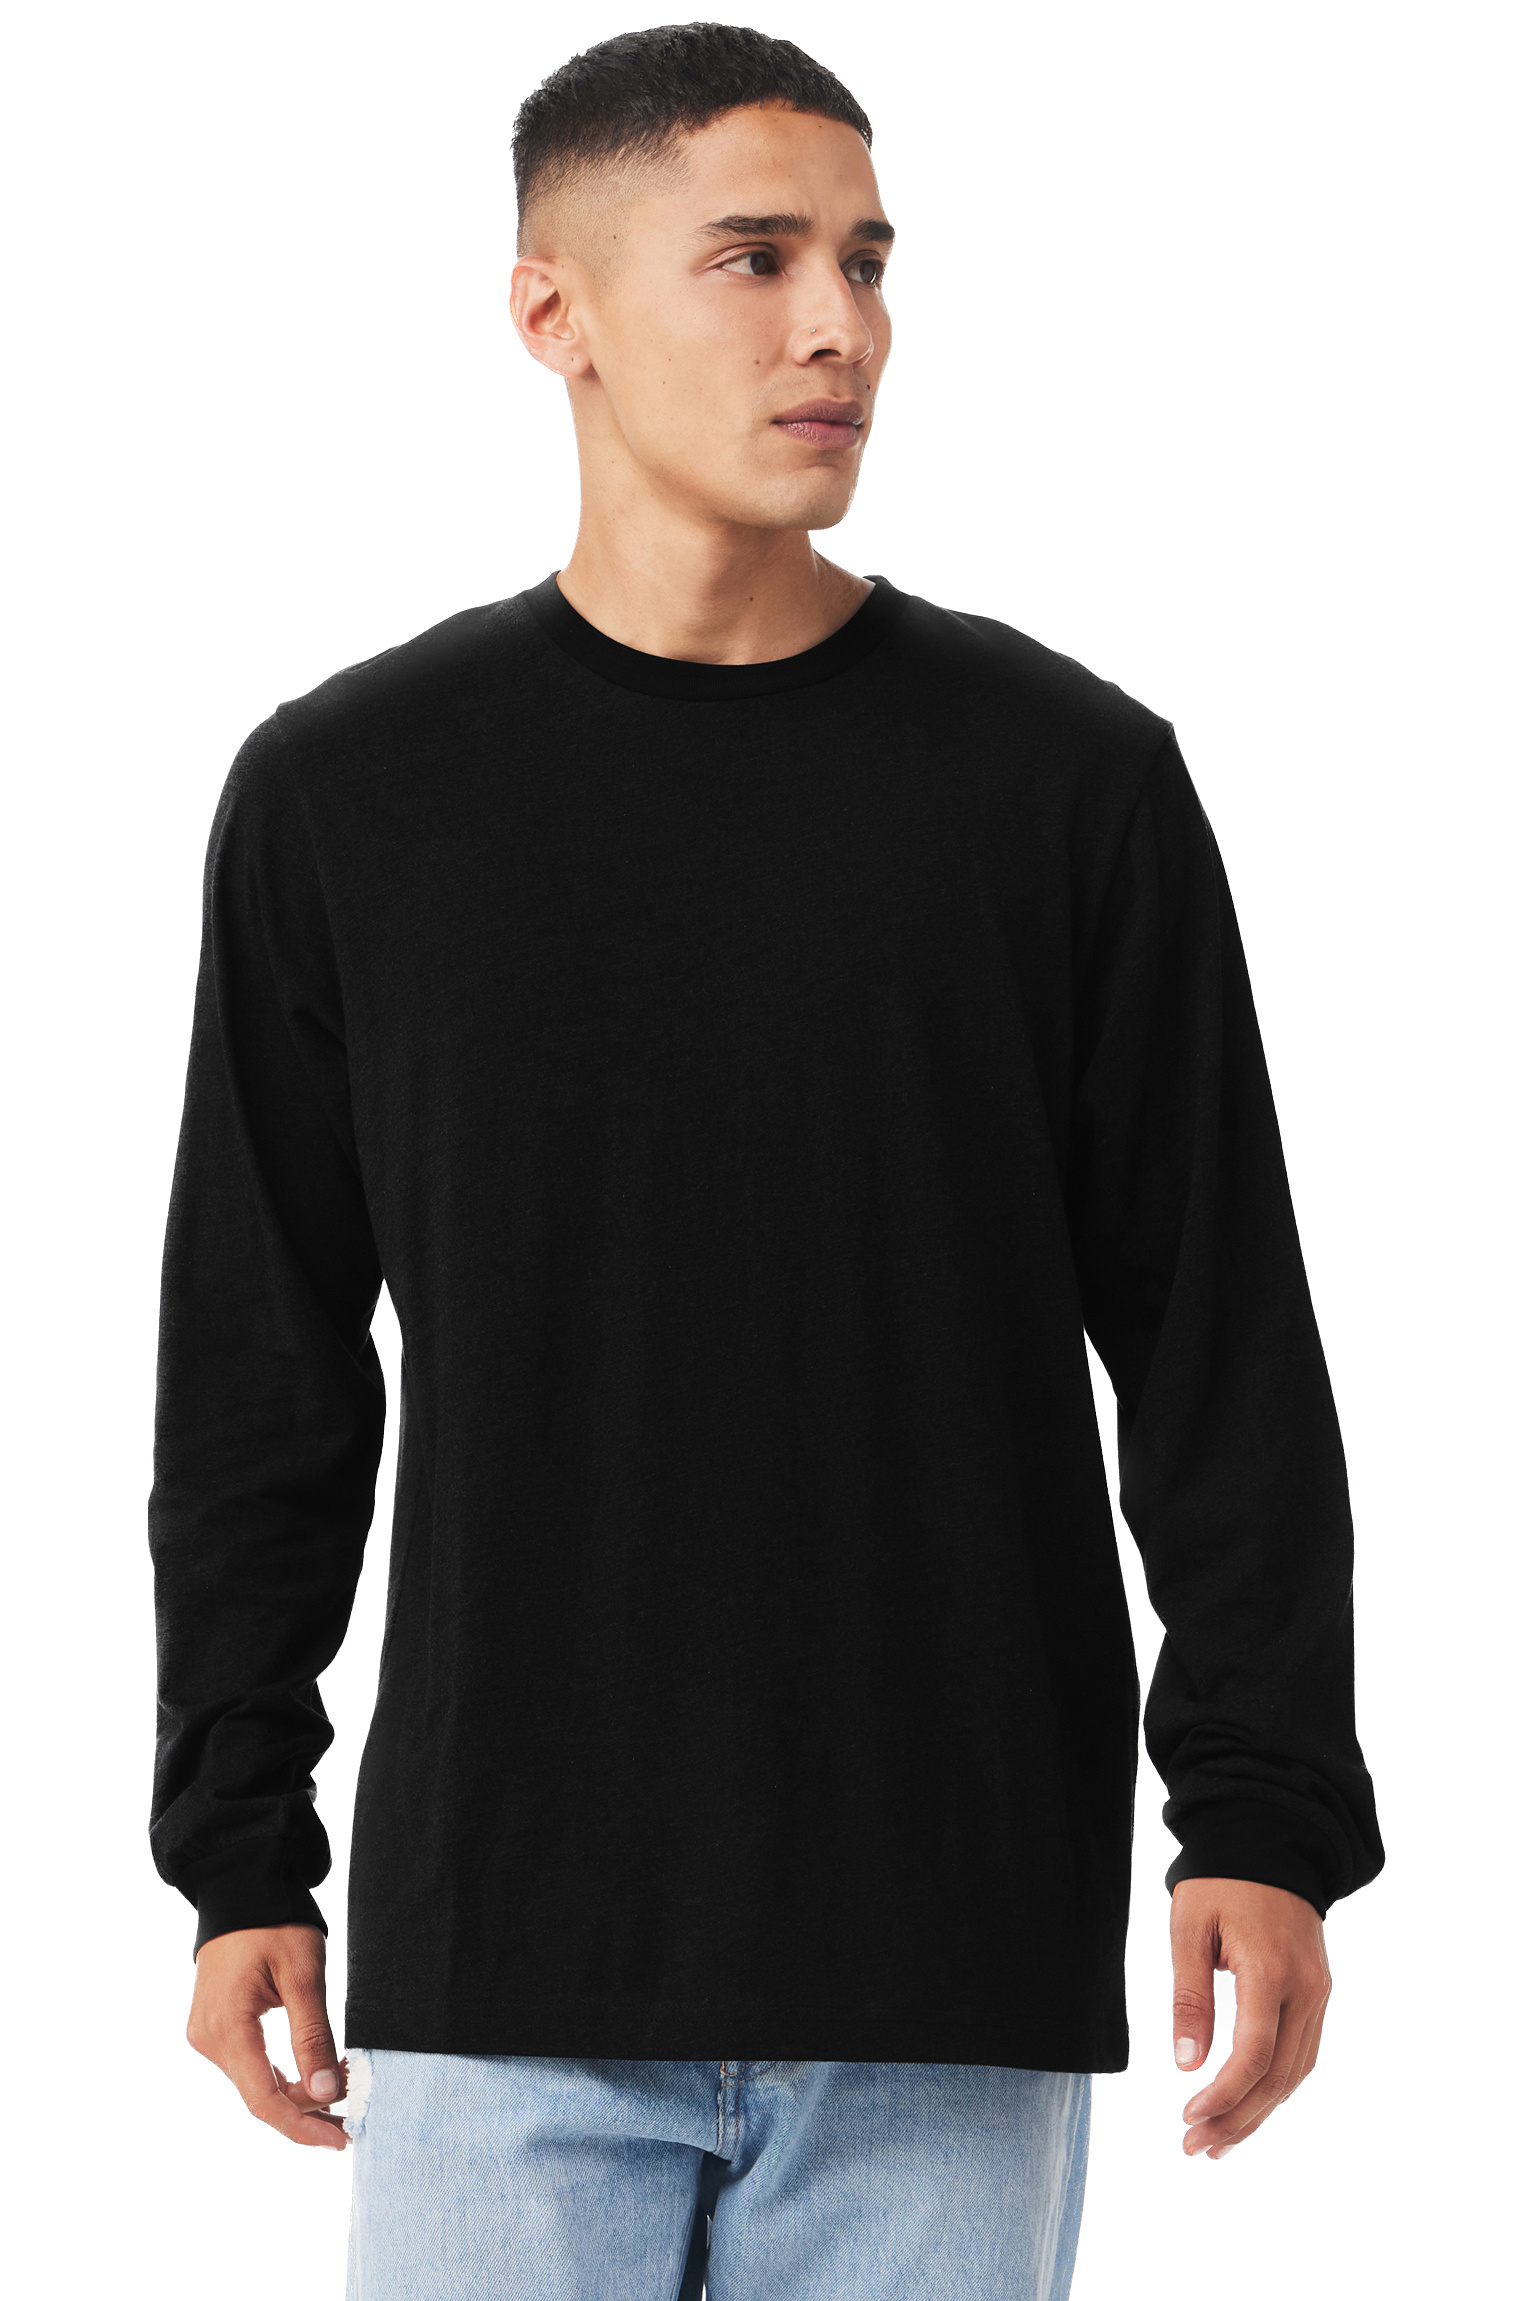 Soft Cotton Long Sleeve Adult T Shirts In Black & S Size | Jiffy